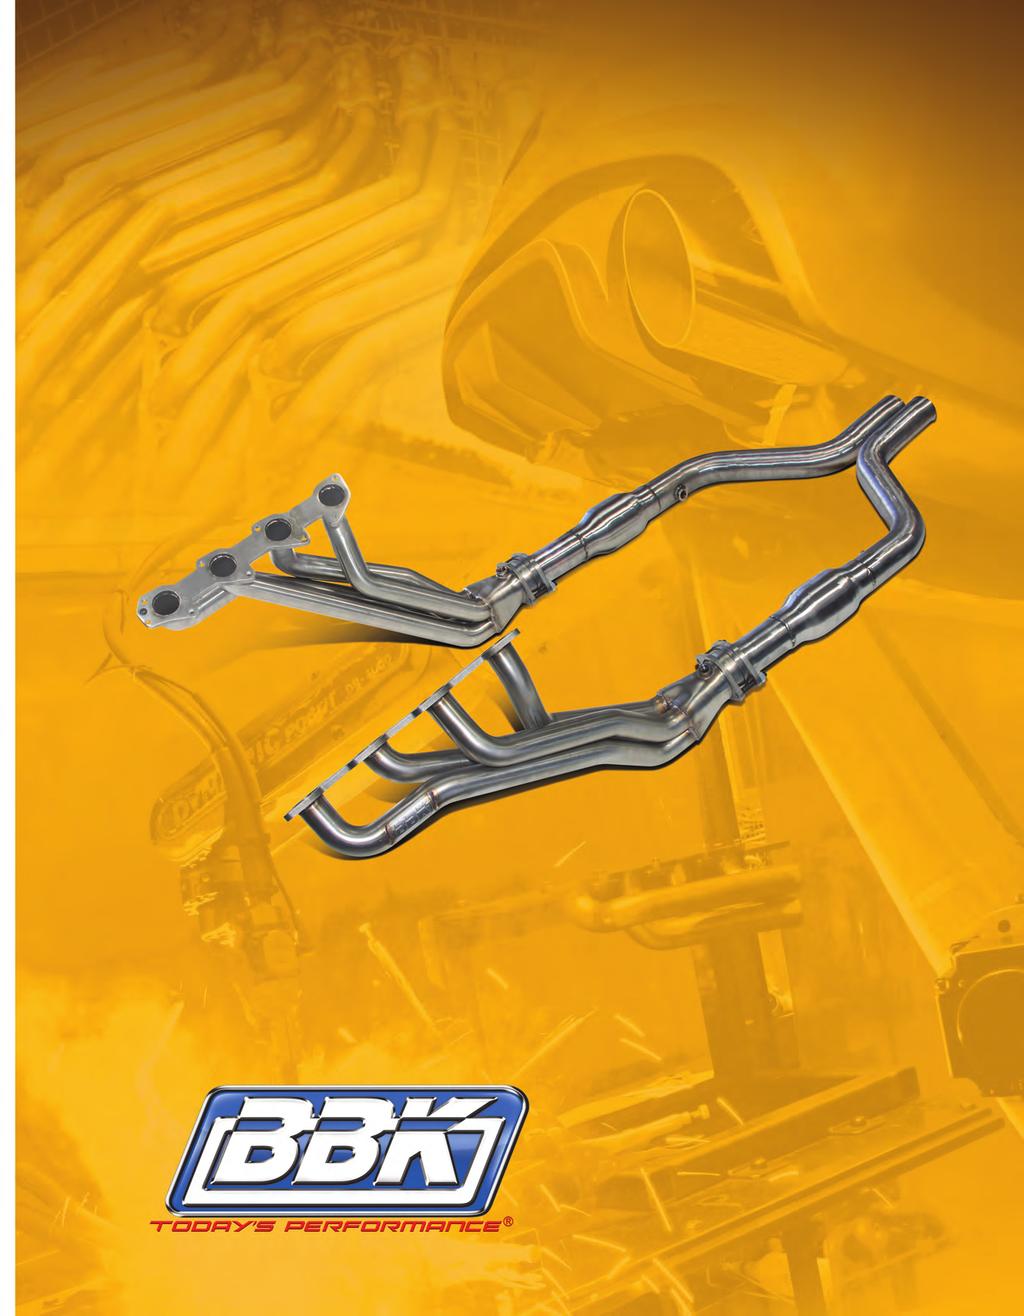 PERFORMANCE EXHAUST PRODUcTS ALL AMERICAN BUILT USA AIRCRAFT QUALITY CONSTRUCTION DIRECT BOLT-ON DESIGNS COMPUTER MANDREL BENT FOR MAXIMUM FLOW AND PERFORMANCE Since 1988 our team has been designing